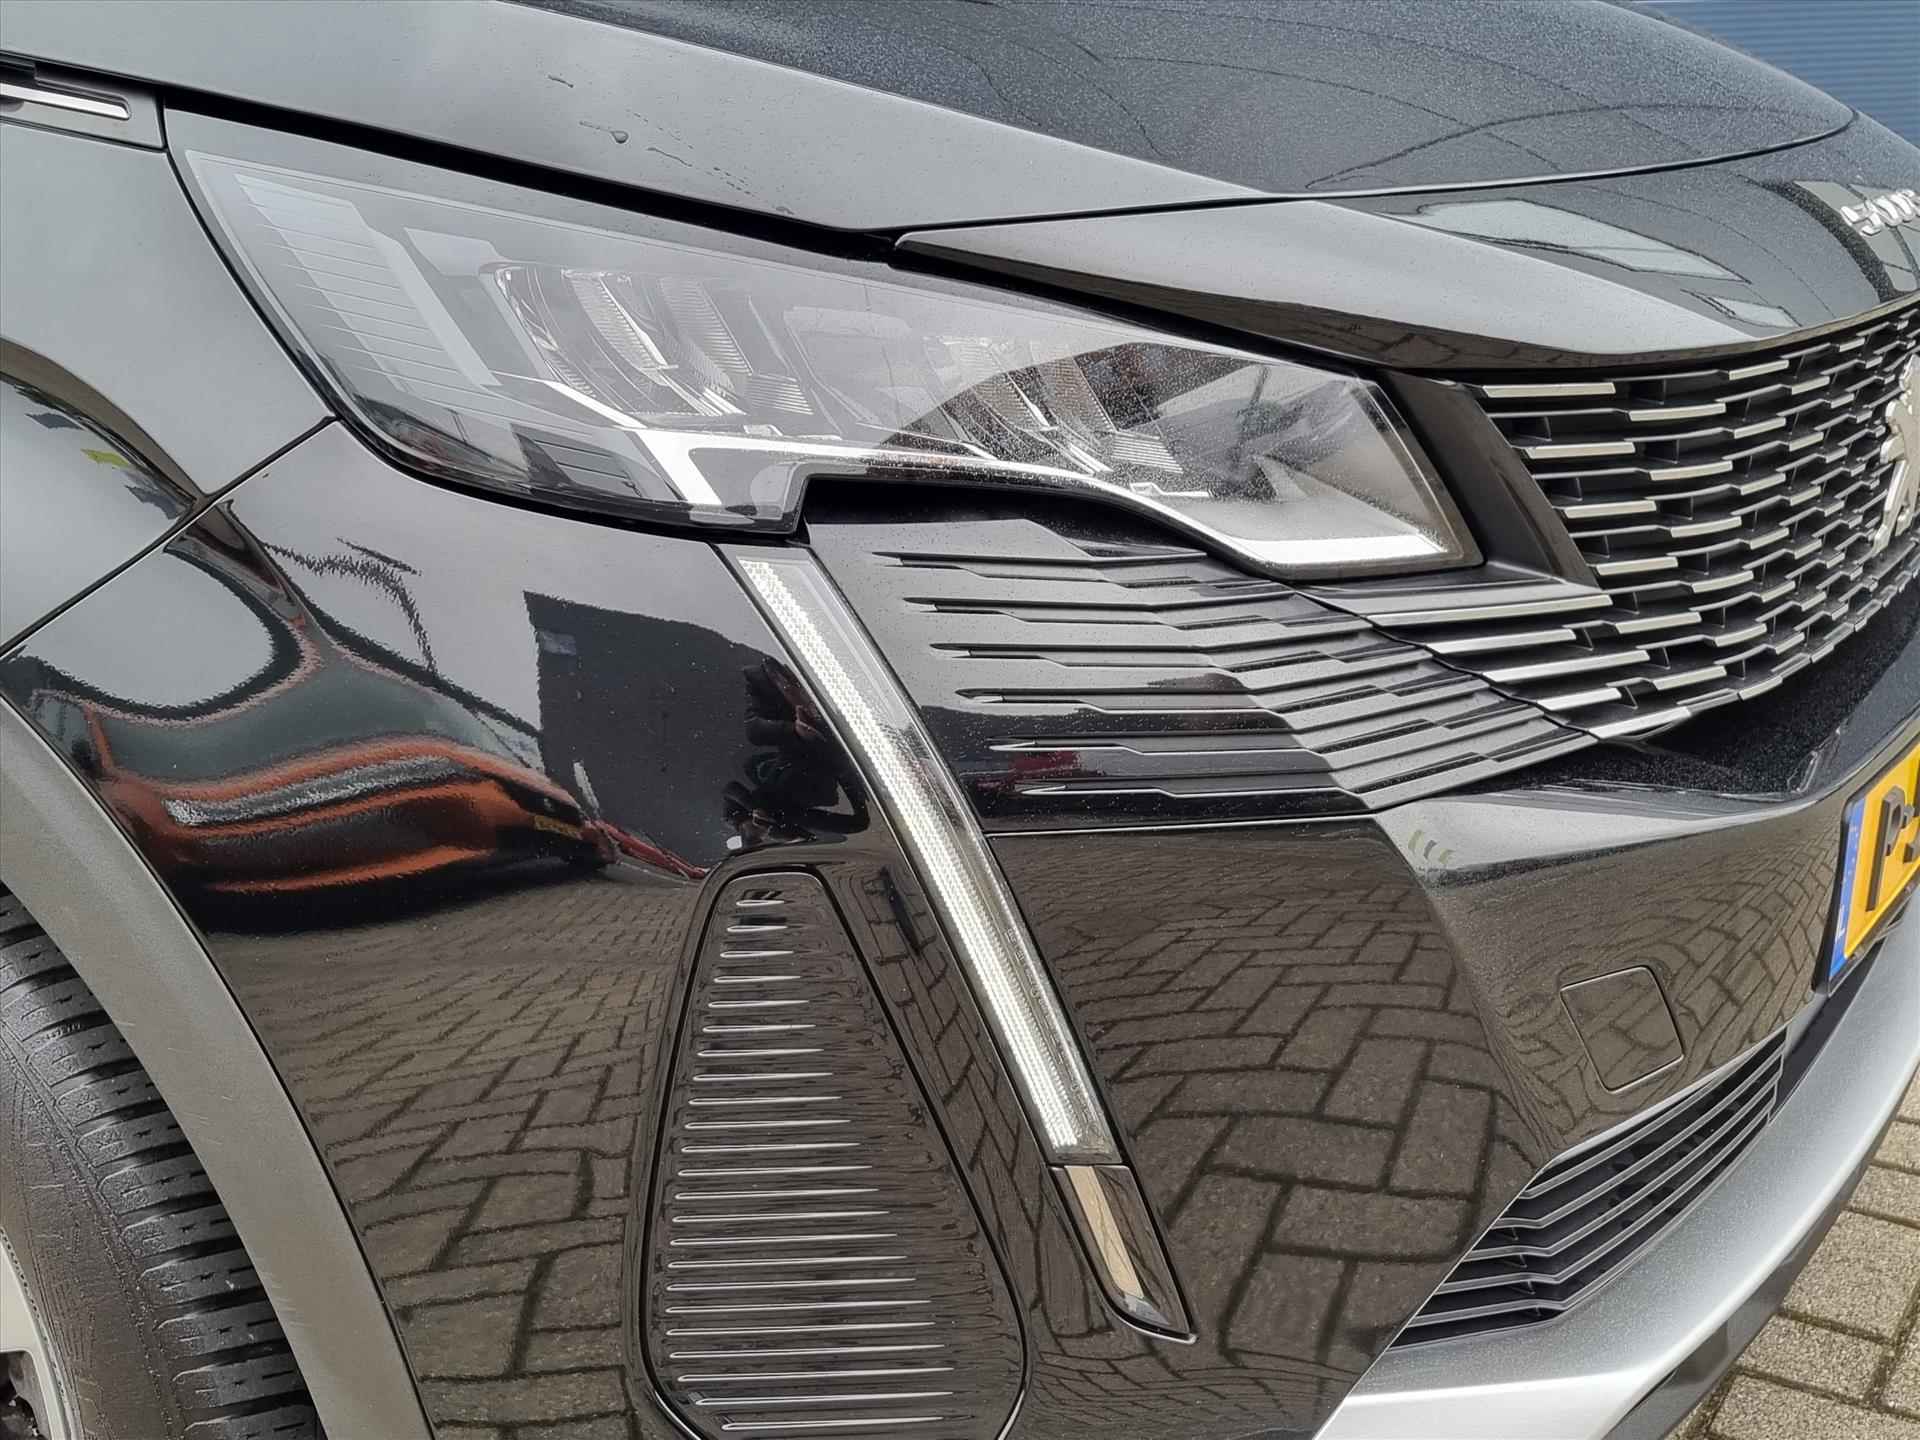 PEUGEOT 5008 1.2 Turbo 130pk Active Pack Business Automaat | Navigatie | Camera | All Season Banden | 7-Persoons | Climate Control | Parkeersensoren V+A | - 40/46